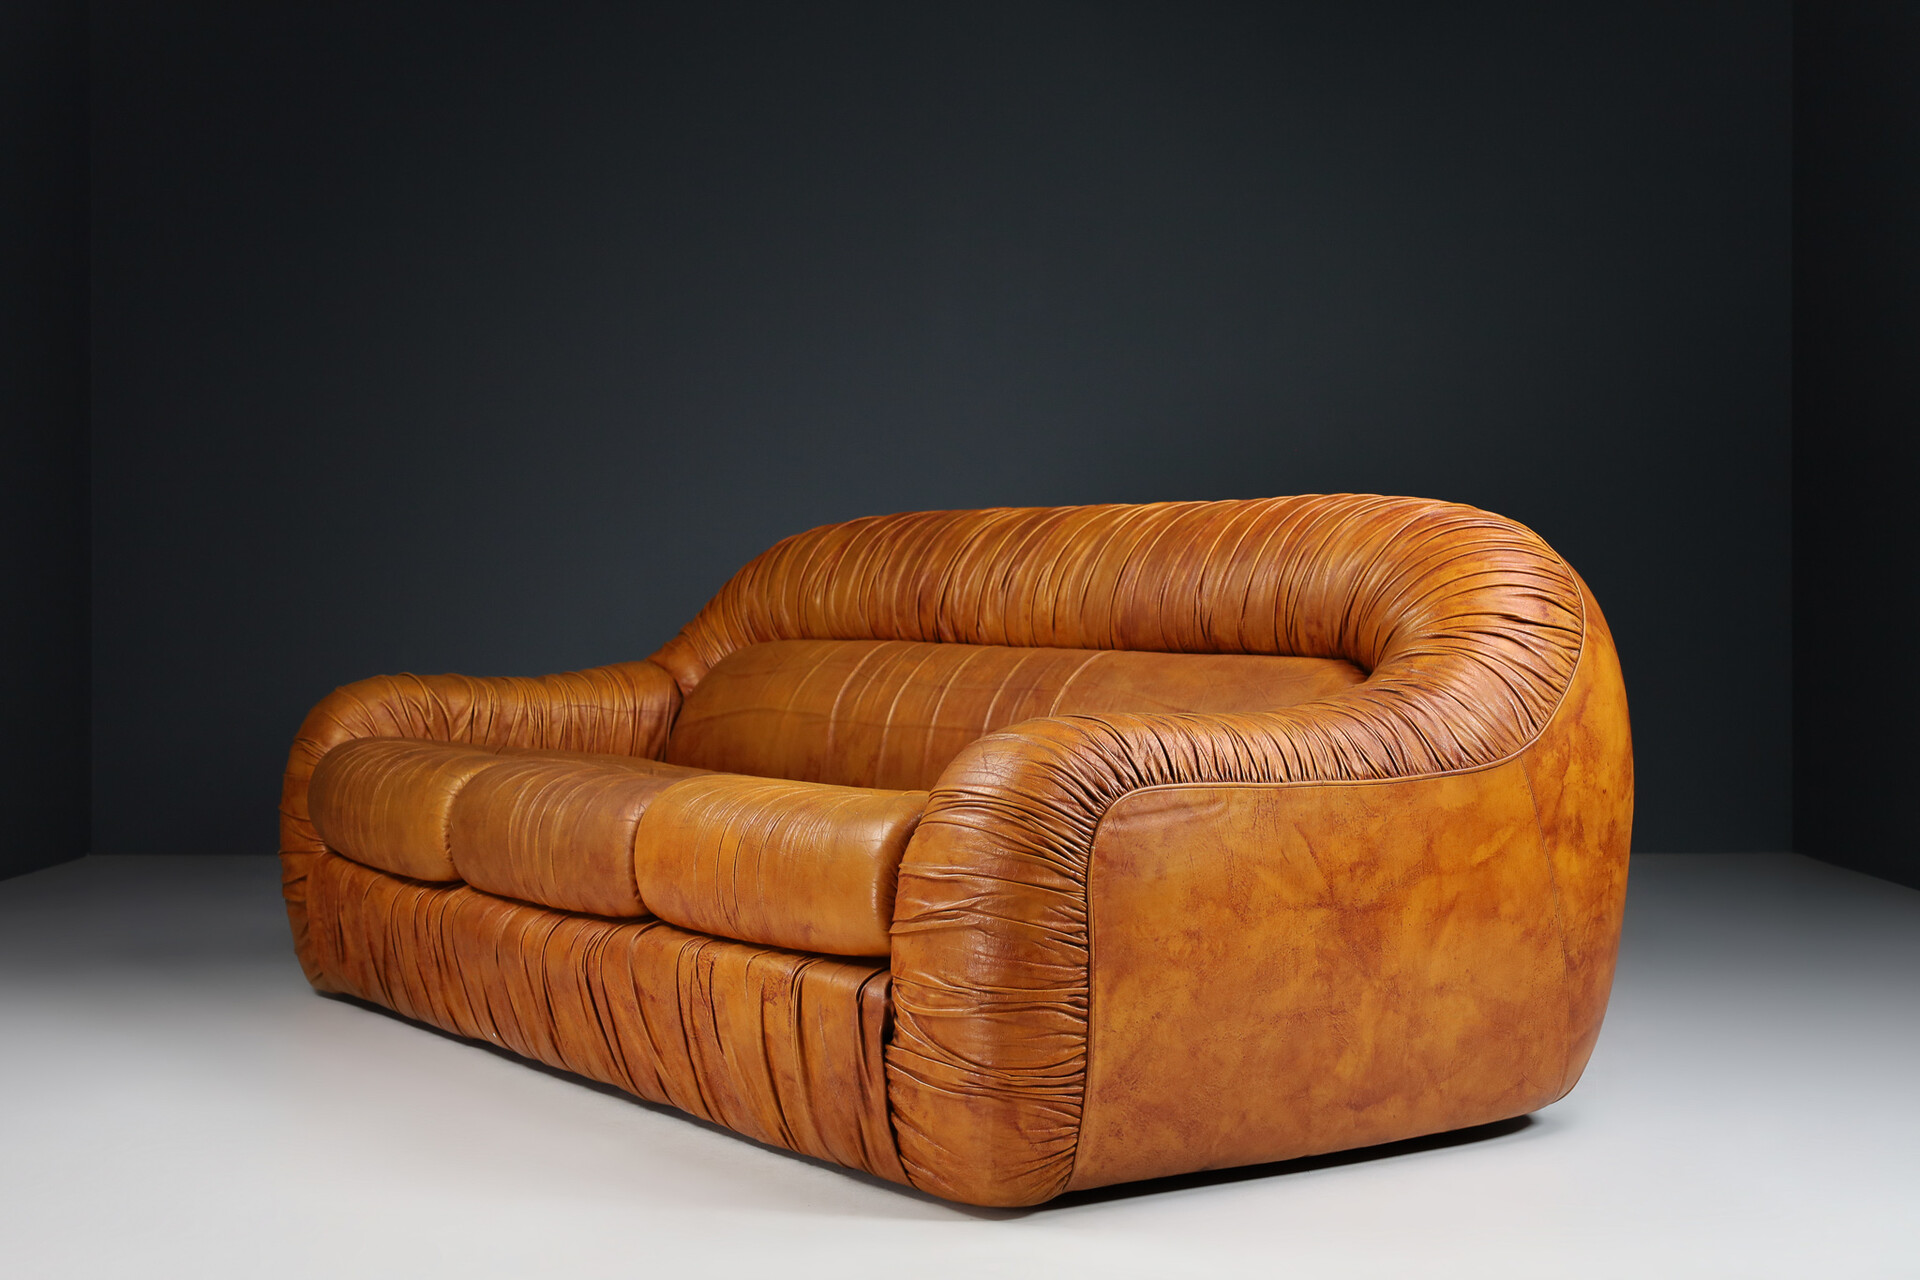 Lounge Eurosalotto, model Bighinello sofa Davidowski - modern by - 1970s for Sofas Mid and leather, Benches Italy brown George designed original century Late-20th century - \'Capriccio\' Seating in